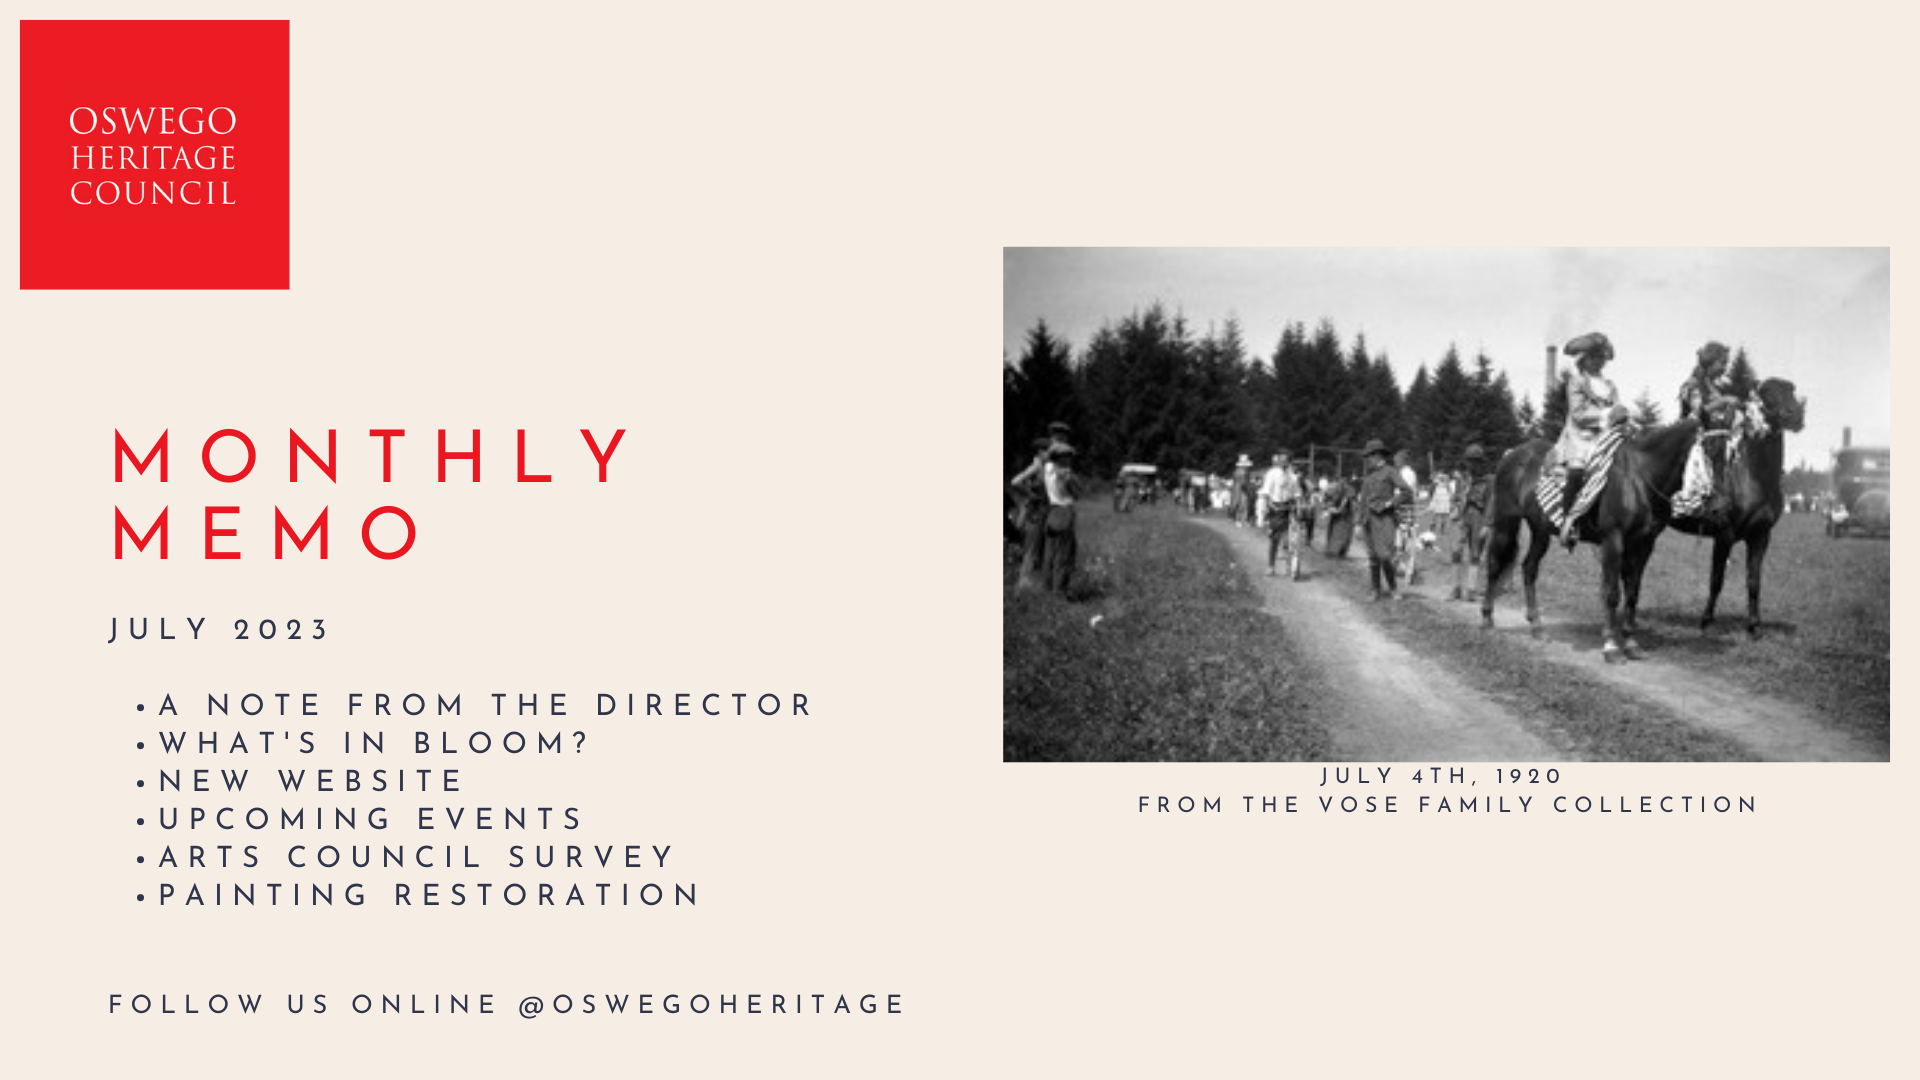 Monthly Memo: July 2023, includes a note from the director, what's in bloom?, new website, upcoming events, Arts Council survey, painting restoration. To the right, a historic photograph from July 4th, 1920 from the Vose Family Collection. A small parade, led by two people on horseback.